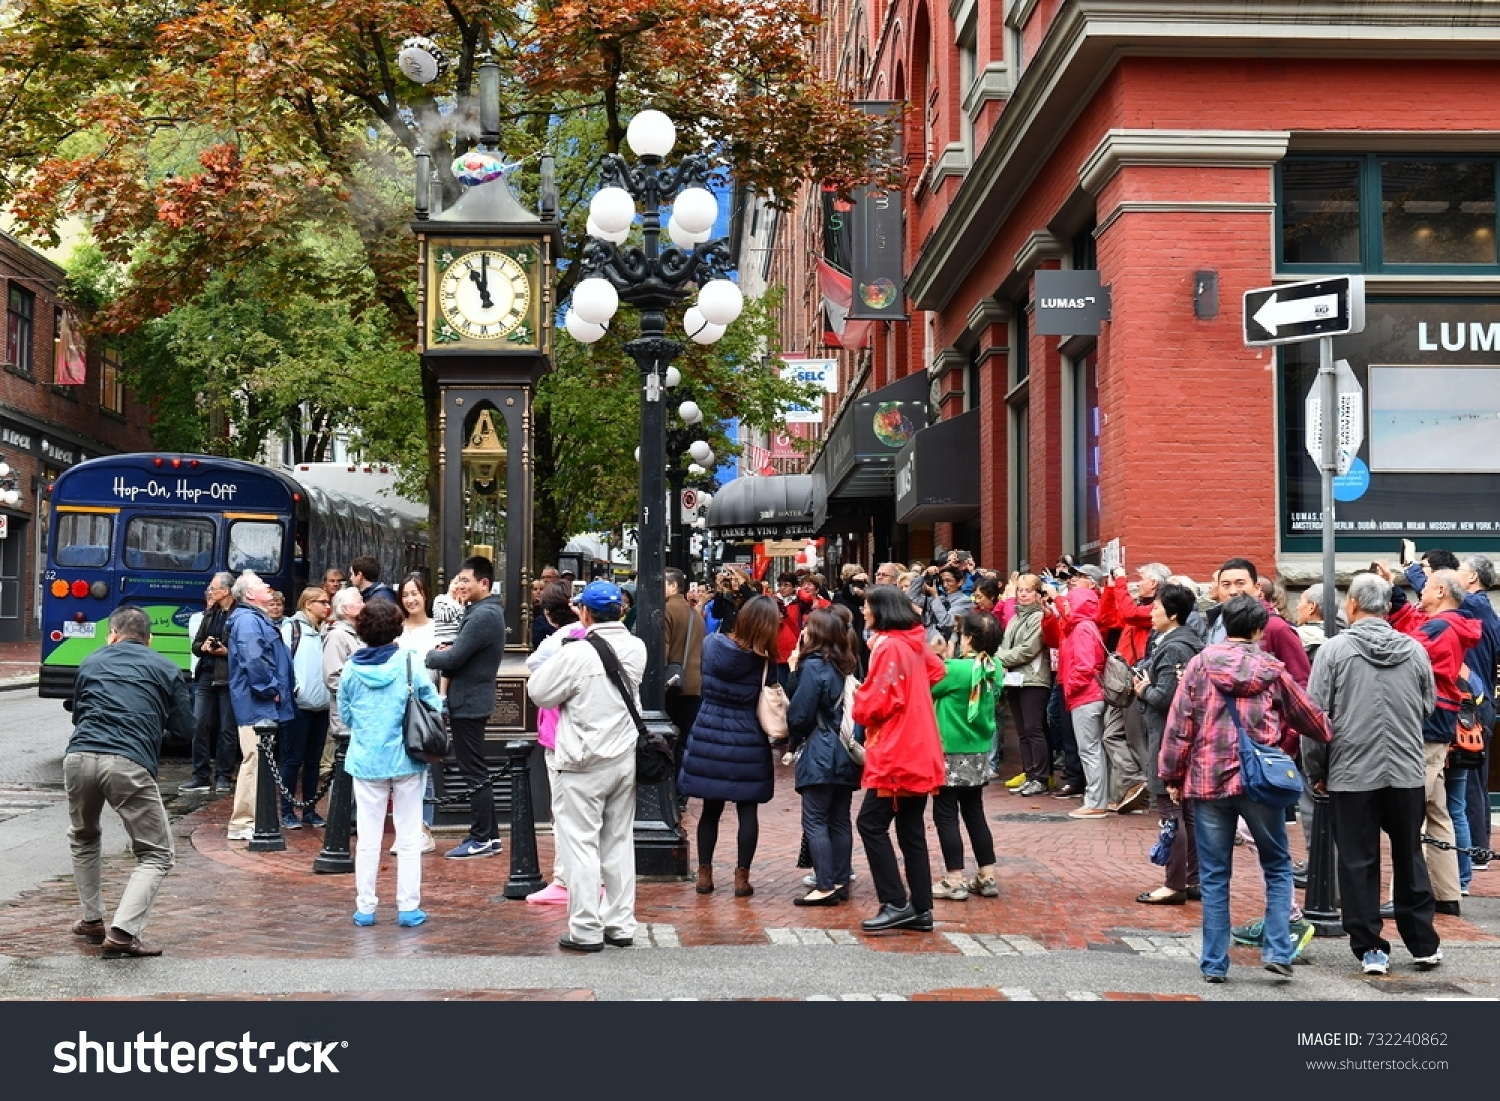 Stroll Through Time in Historic Gastown